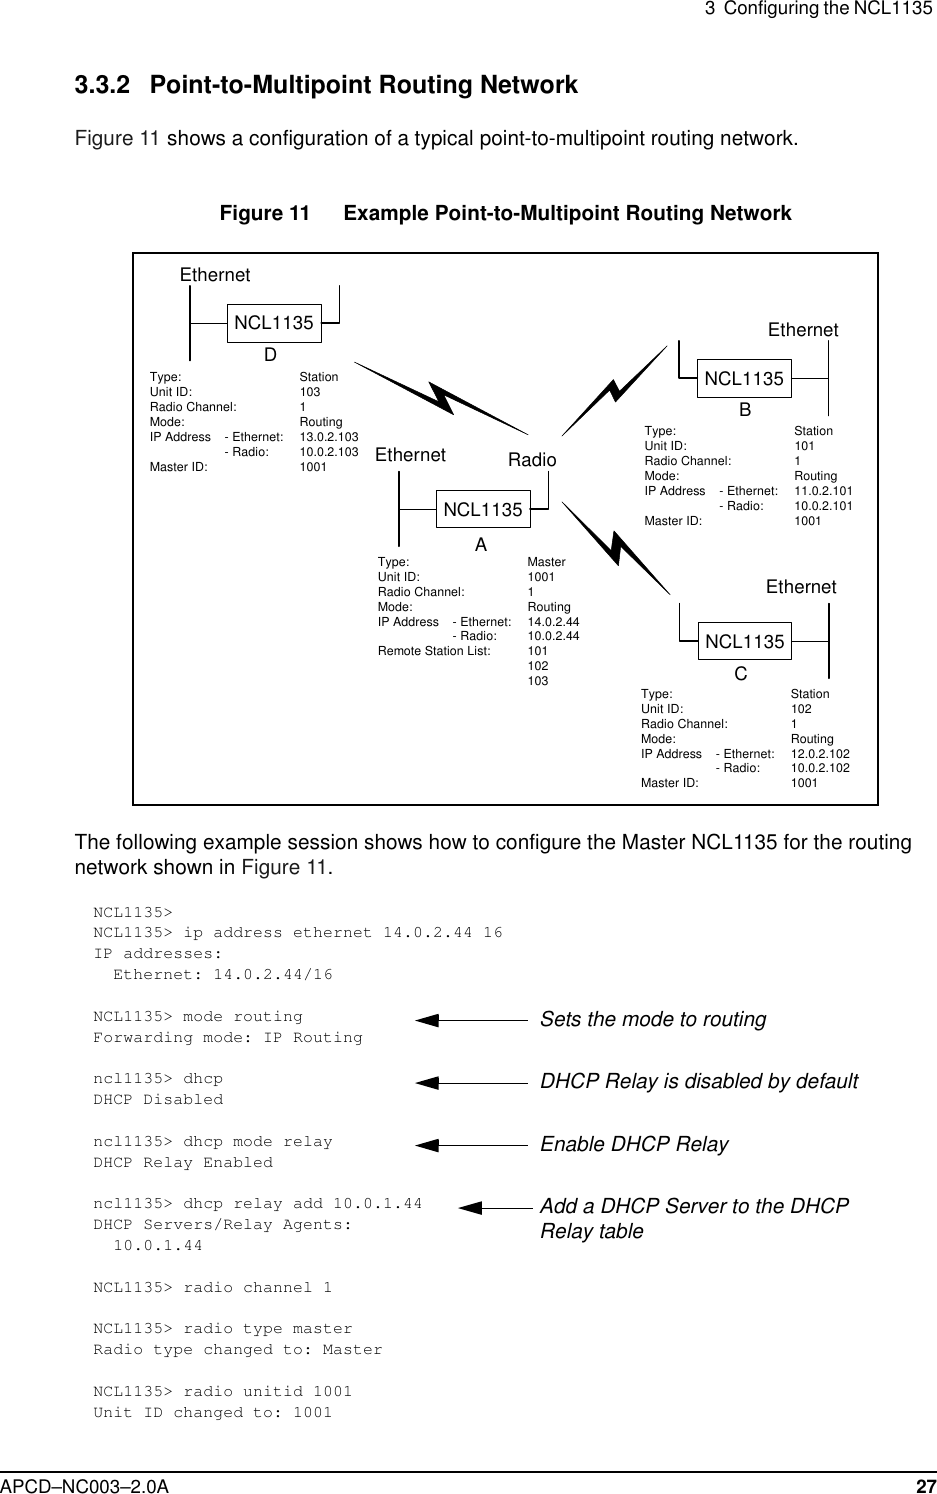 3  Configuring the NCL1135 APCD–NC003–2.0A 273.3.2 Point-to-Multipoint Routing NetworkFigure 11 shows a configuration of a typical point-to-multipoint routing network.Figure 11   Example Point-to-Multipoint Routing NetworkThe following example session shows how to configure the Master NCL1135 for the routing network shown in Figure 11.NCL1135&gt;NCL1135&gt; ip address ethernet 14.0.2.44 16IP addresses:  Ethernet: 14.0.2.44/16NCL1135&gt; mode routingForwarding mode: IP Routingncl1135&gt; dhcpDHCP Disabledncl1135&gt; dhcp mode relayDHCP Relay Enabledncl1135&gt; dhcp relay add 10.0.1.44 DHCP Servers/Relay Agents:  10.0.1.44NCL1135&gt; radio channel 1NCL1135&gt; radio type masterRadio type changed to: MasterNCL1135&gt; radio unitid 1001Unit ID changed to: 1001EthernetNCL1135CEthernetNCL1135BEthernetNCL1135DEthernet RadioNCL1135AType: StationUnit ID: 103Radio Channel: 1Mode: RoutingIP Address - Ethernet: 13.0.2.103- Radio: 10.0.2.103Master ID: 1001Type: StationUnit ID: 102Radio Channel: 1Mode: RoutingIP Address - Ethernet: 12.0.2.102- Radio: 10.0.2.102Master ID: 1001Type: StationUnit ID: 101Radio Channel: 1Mode: RoutingIP Address - Ethernet: 11.0.2.101- Radio: 10.0.2.101Master ID: 1001Type: MasterUnit ID: 1001Radio Channel: 1Mode: RoutingIP Address - Ethernet: 14.0.2.44- Radio: 10.0.2.44Remote Station List: 101102103Sets the mode to routingDHCP Relay is disabled by defaultEnable DHCP RelayAdd a DHCP Server to the DHCP Relay table